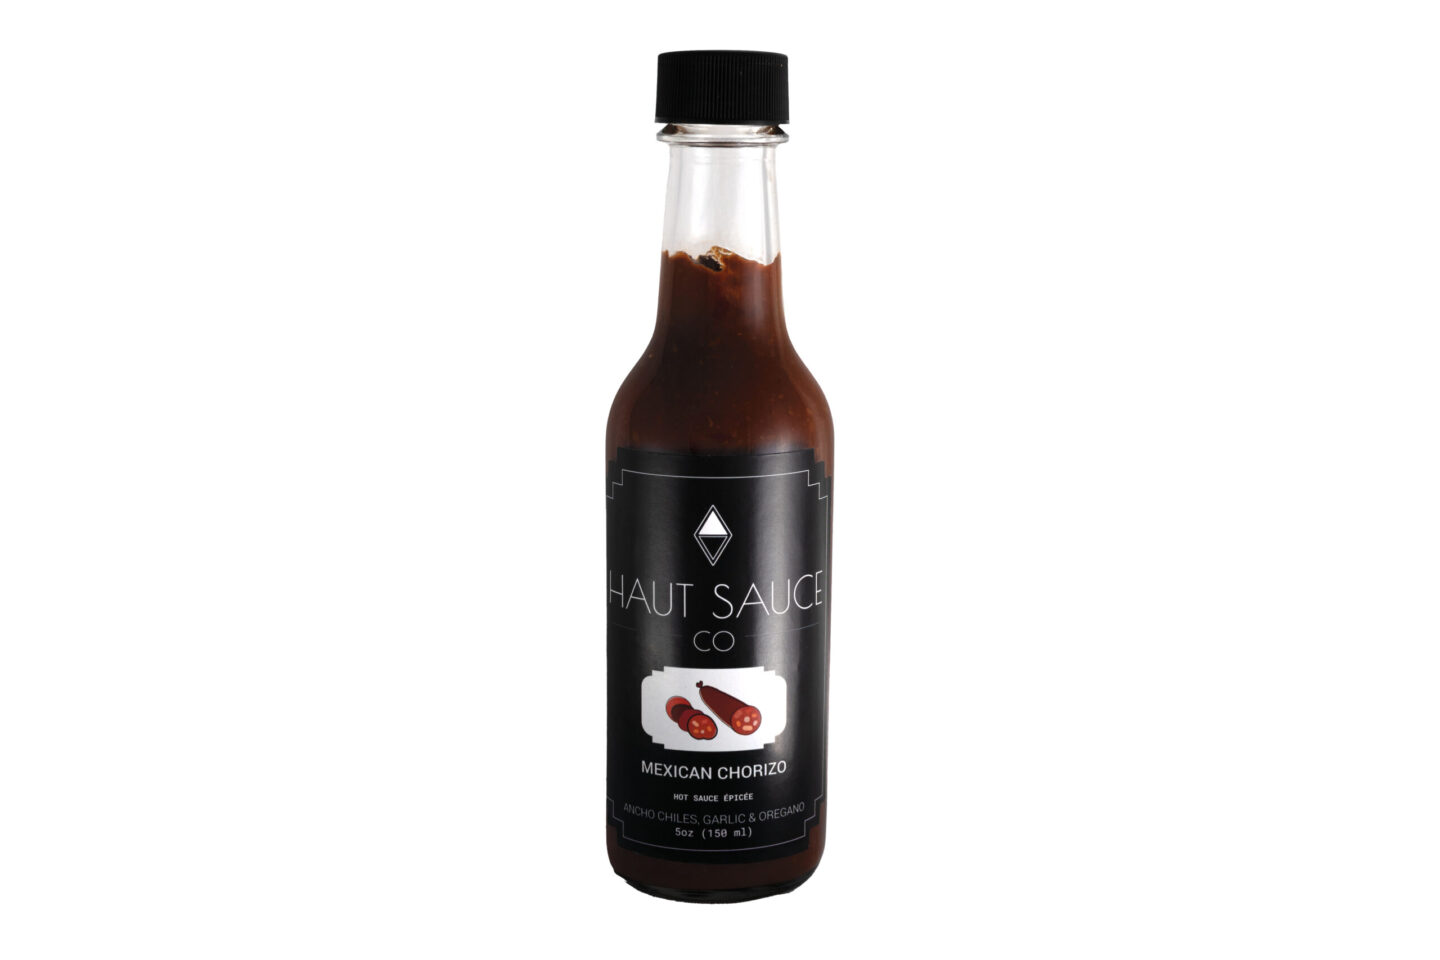 Front label view of Mexican Chorizo sauce by haut sauce co. Ancho Chiles, Garlic & oregano. 5 ounces.